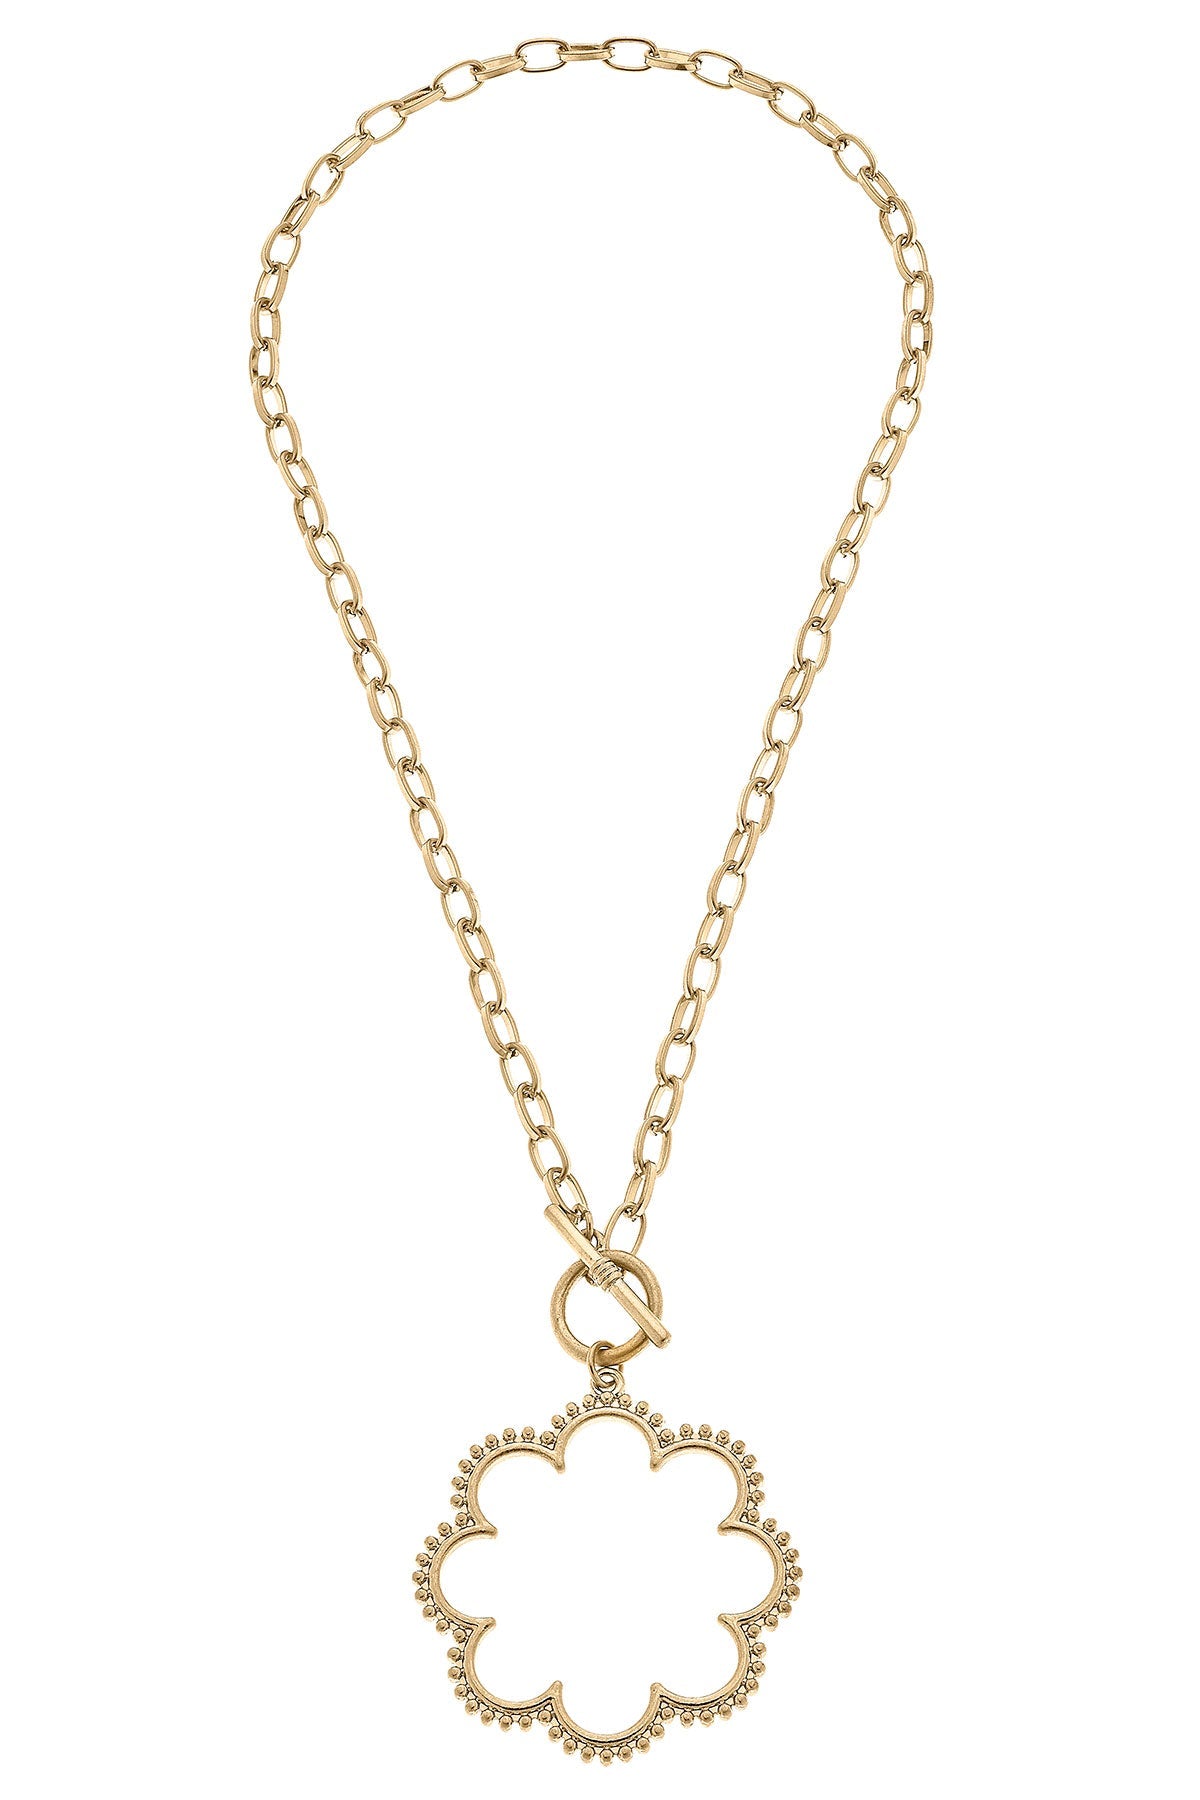 Belle Studded Flower T-Bar Necklace in Worn Gold by CANVAS